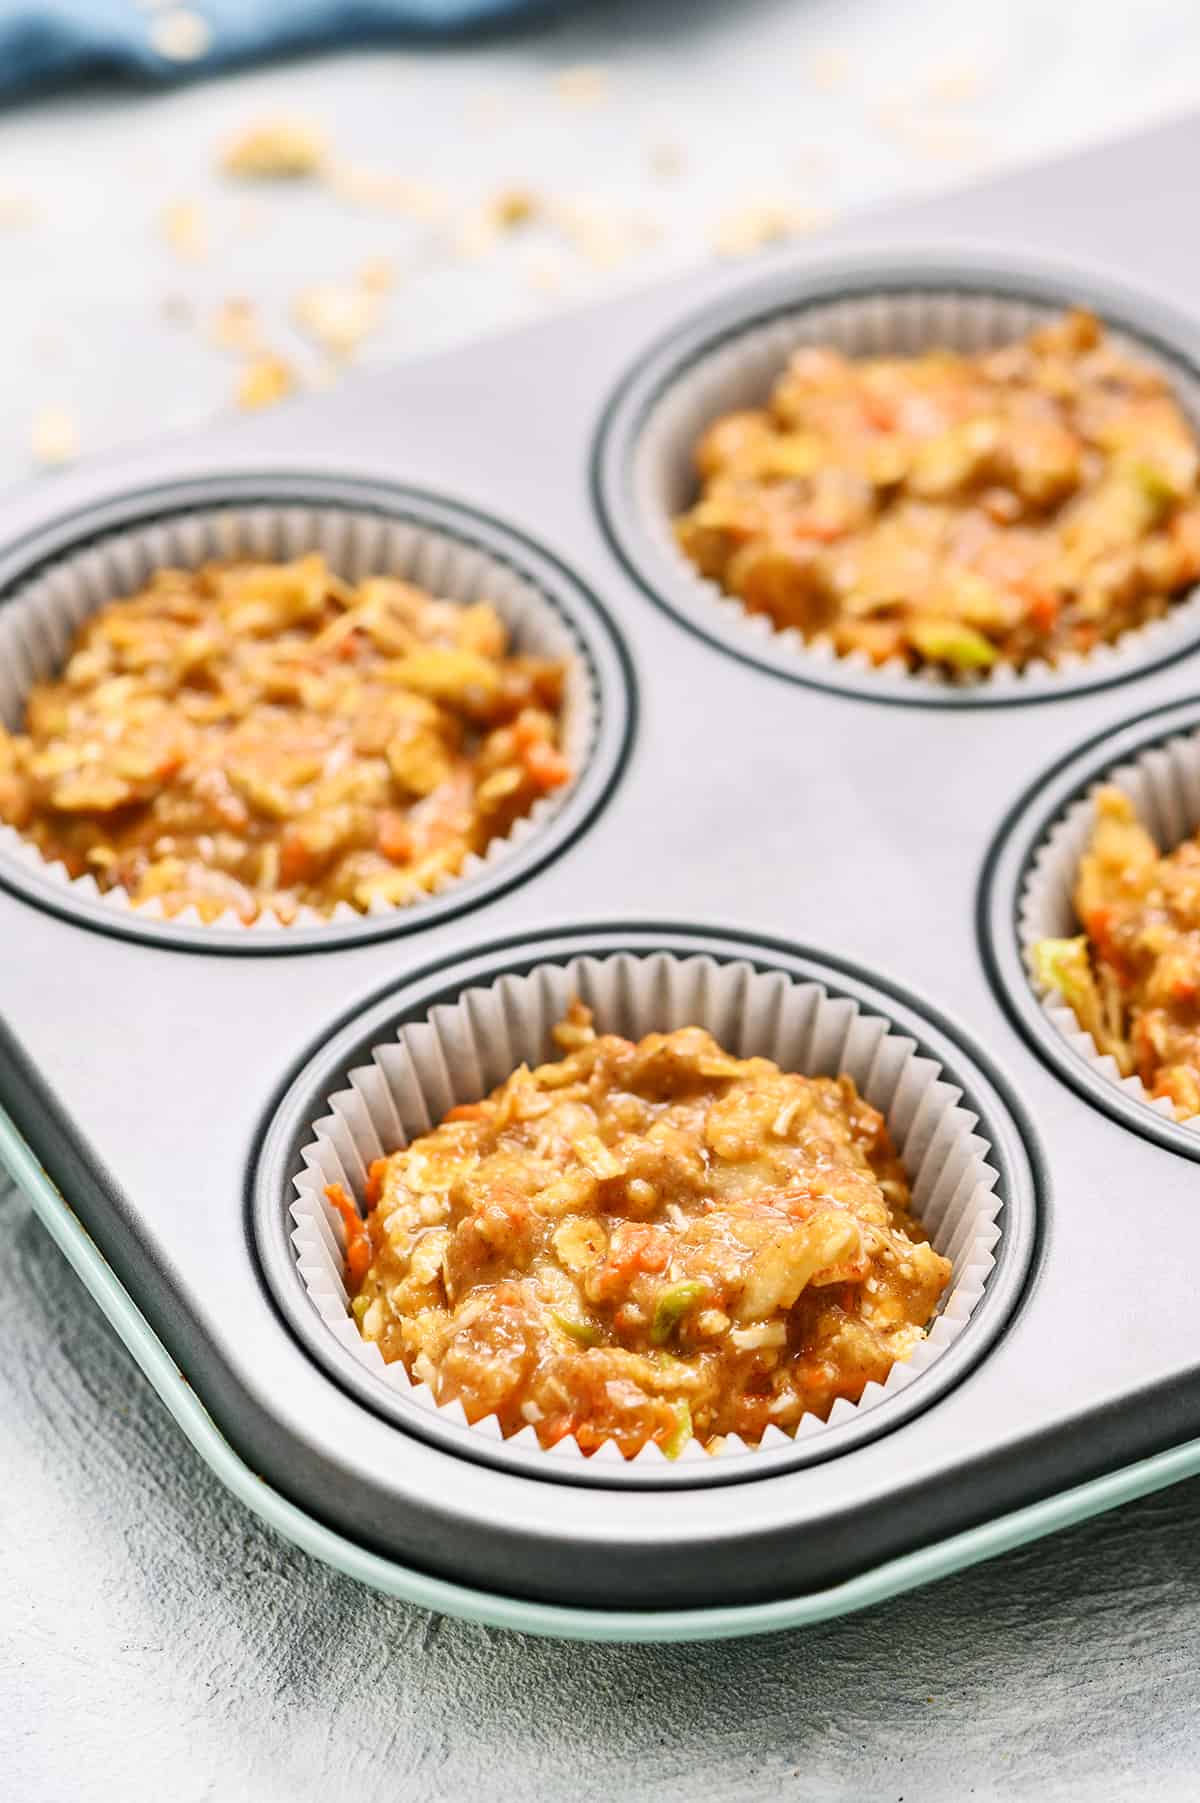 Healthy Easter Recipes - Morning Glory Muffins